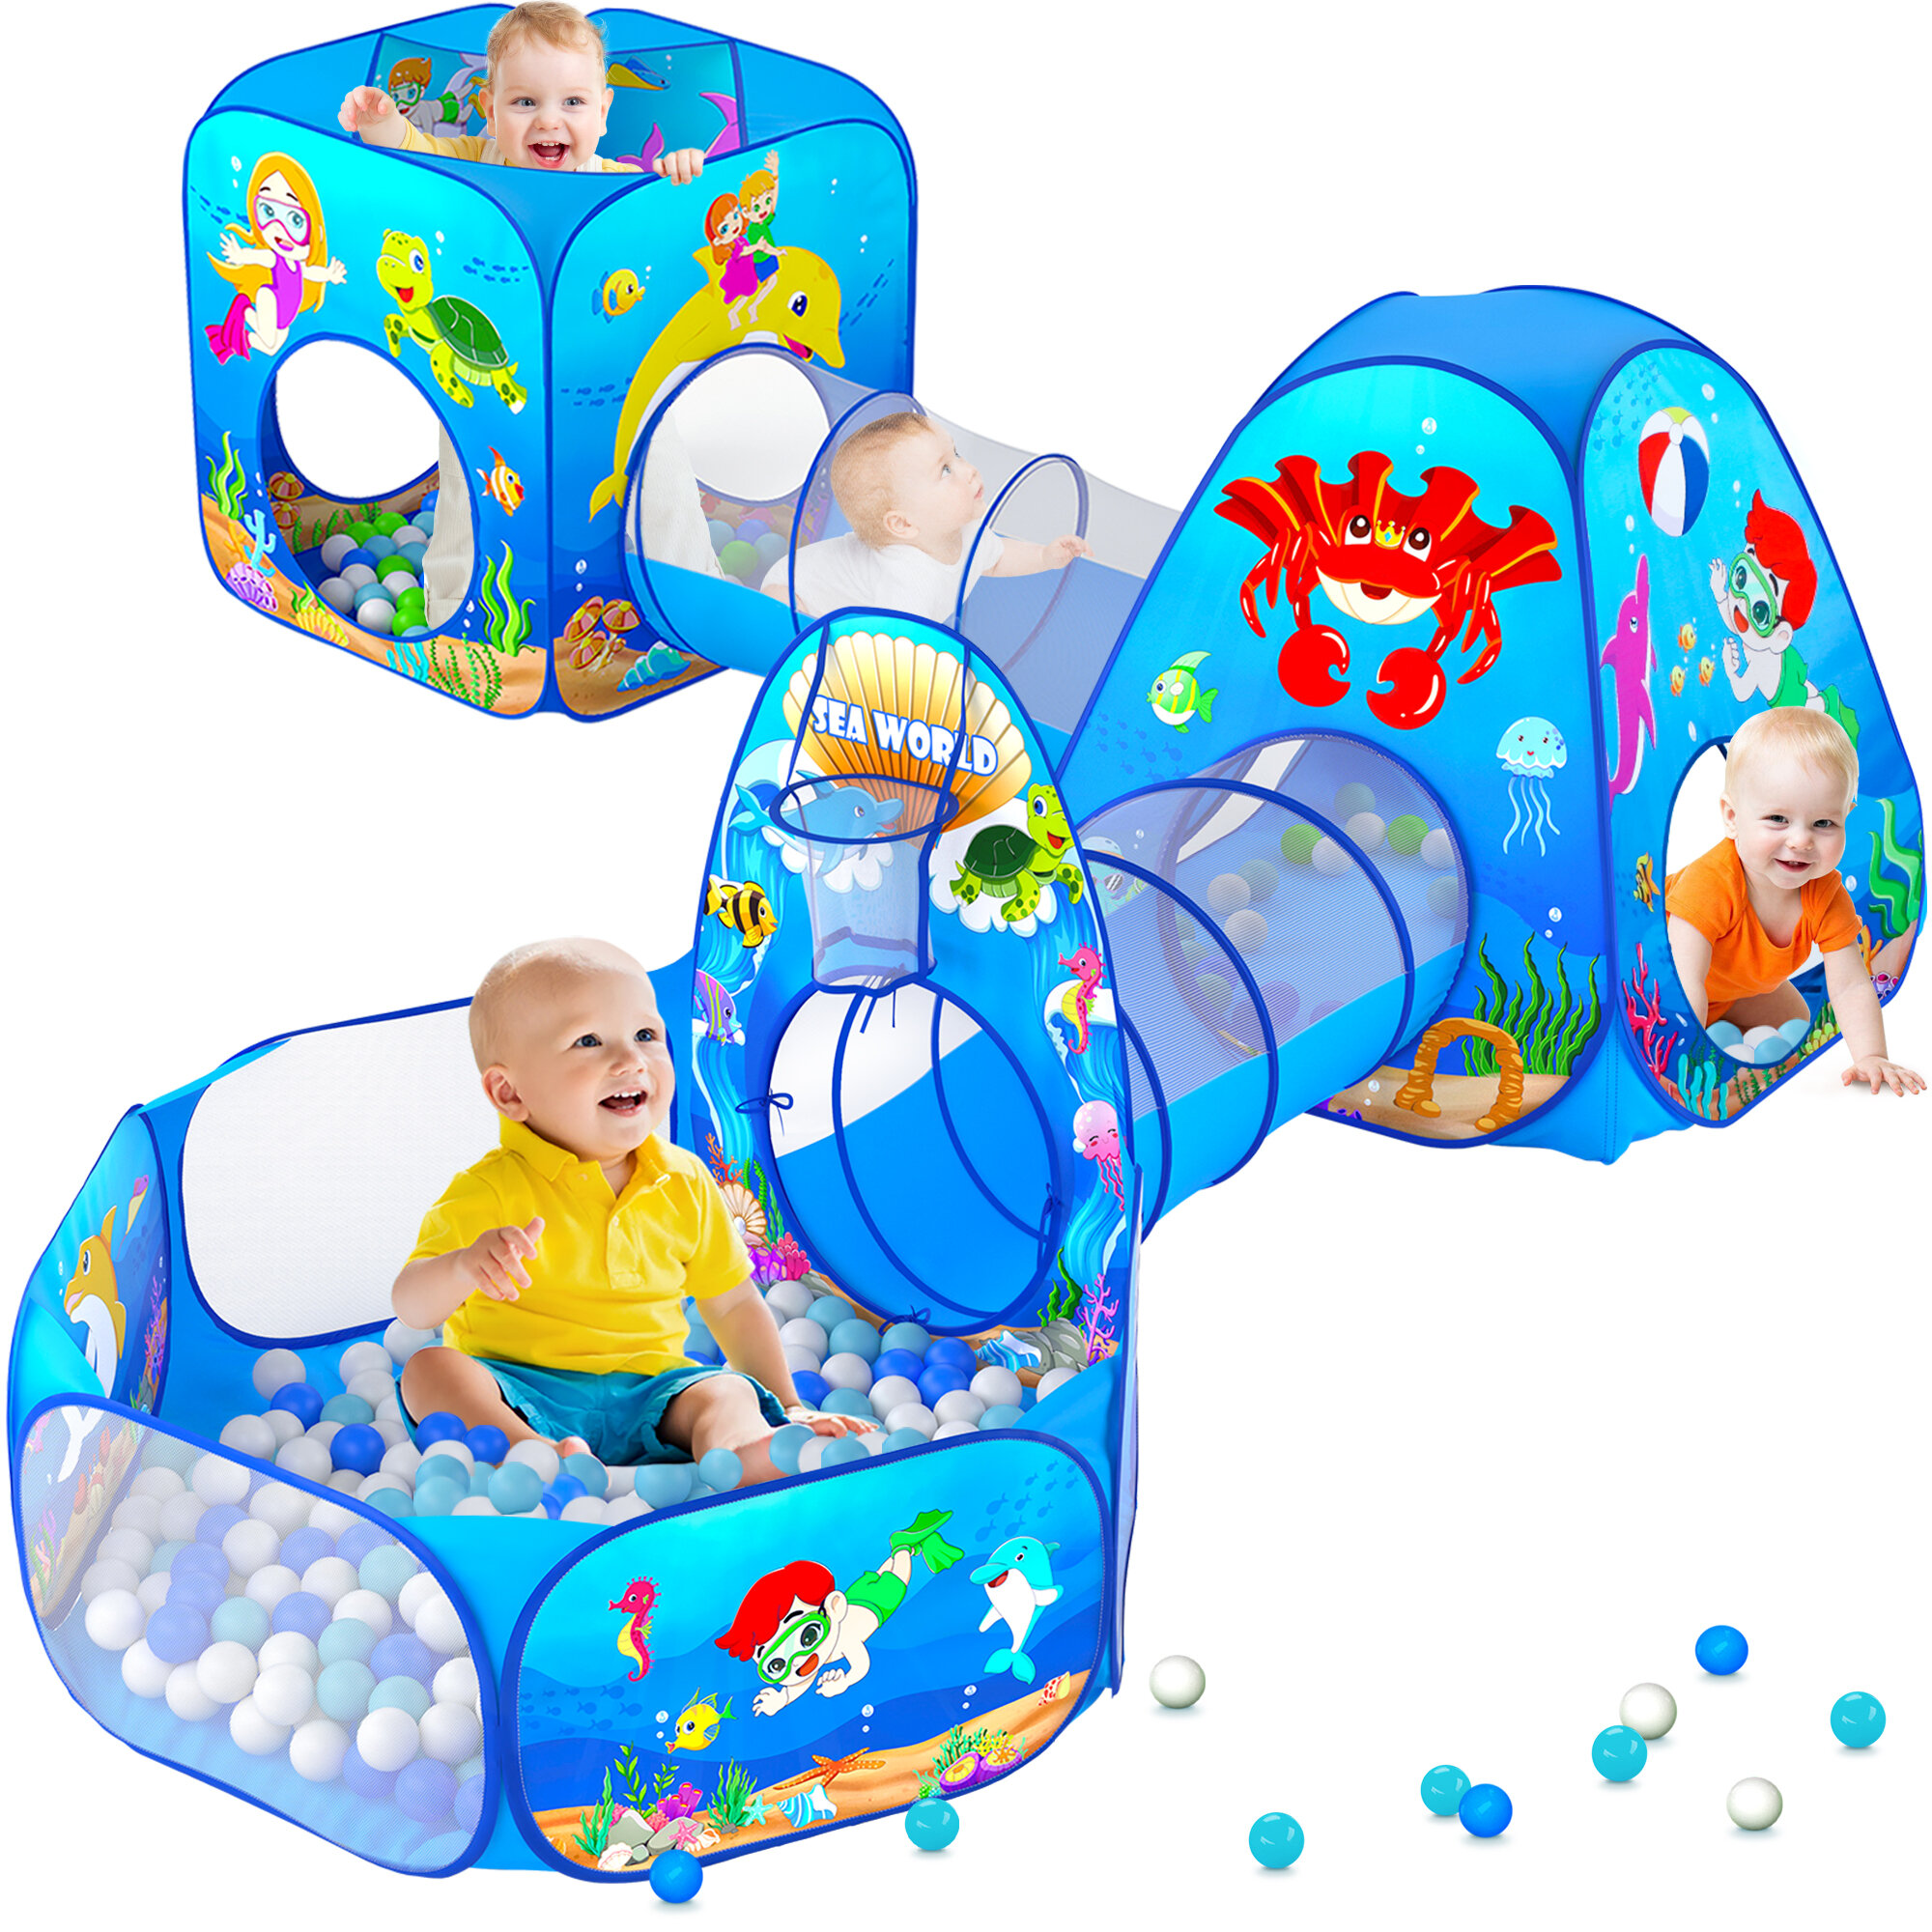 Portable Kids Children Ball Pit Pool Play Tent For Baby Indoor Outdoor Game Toy 